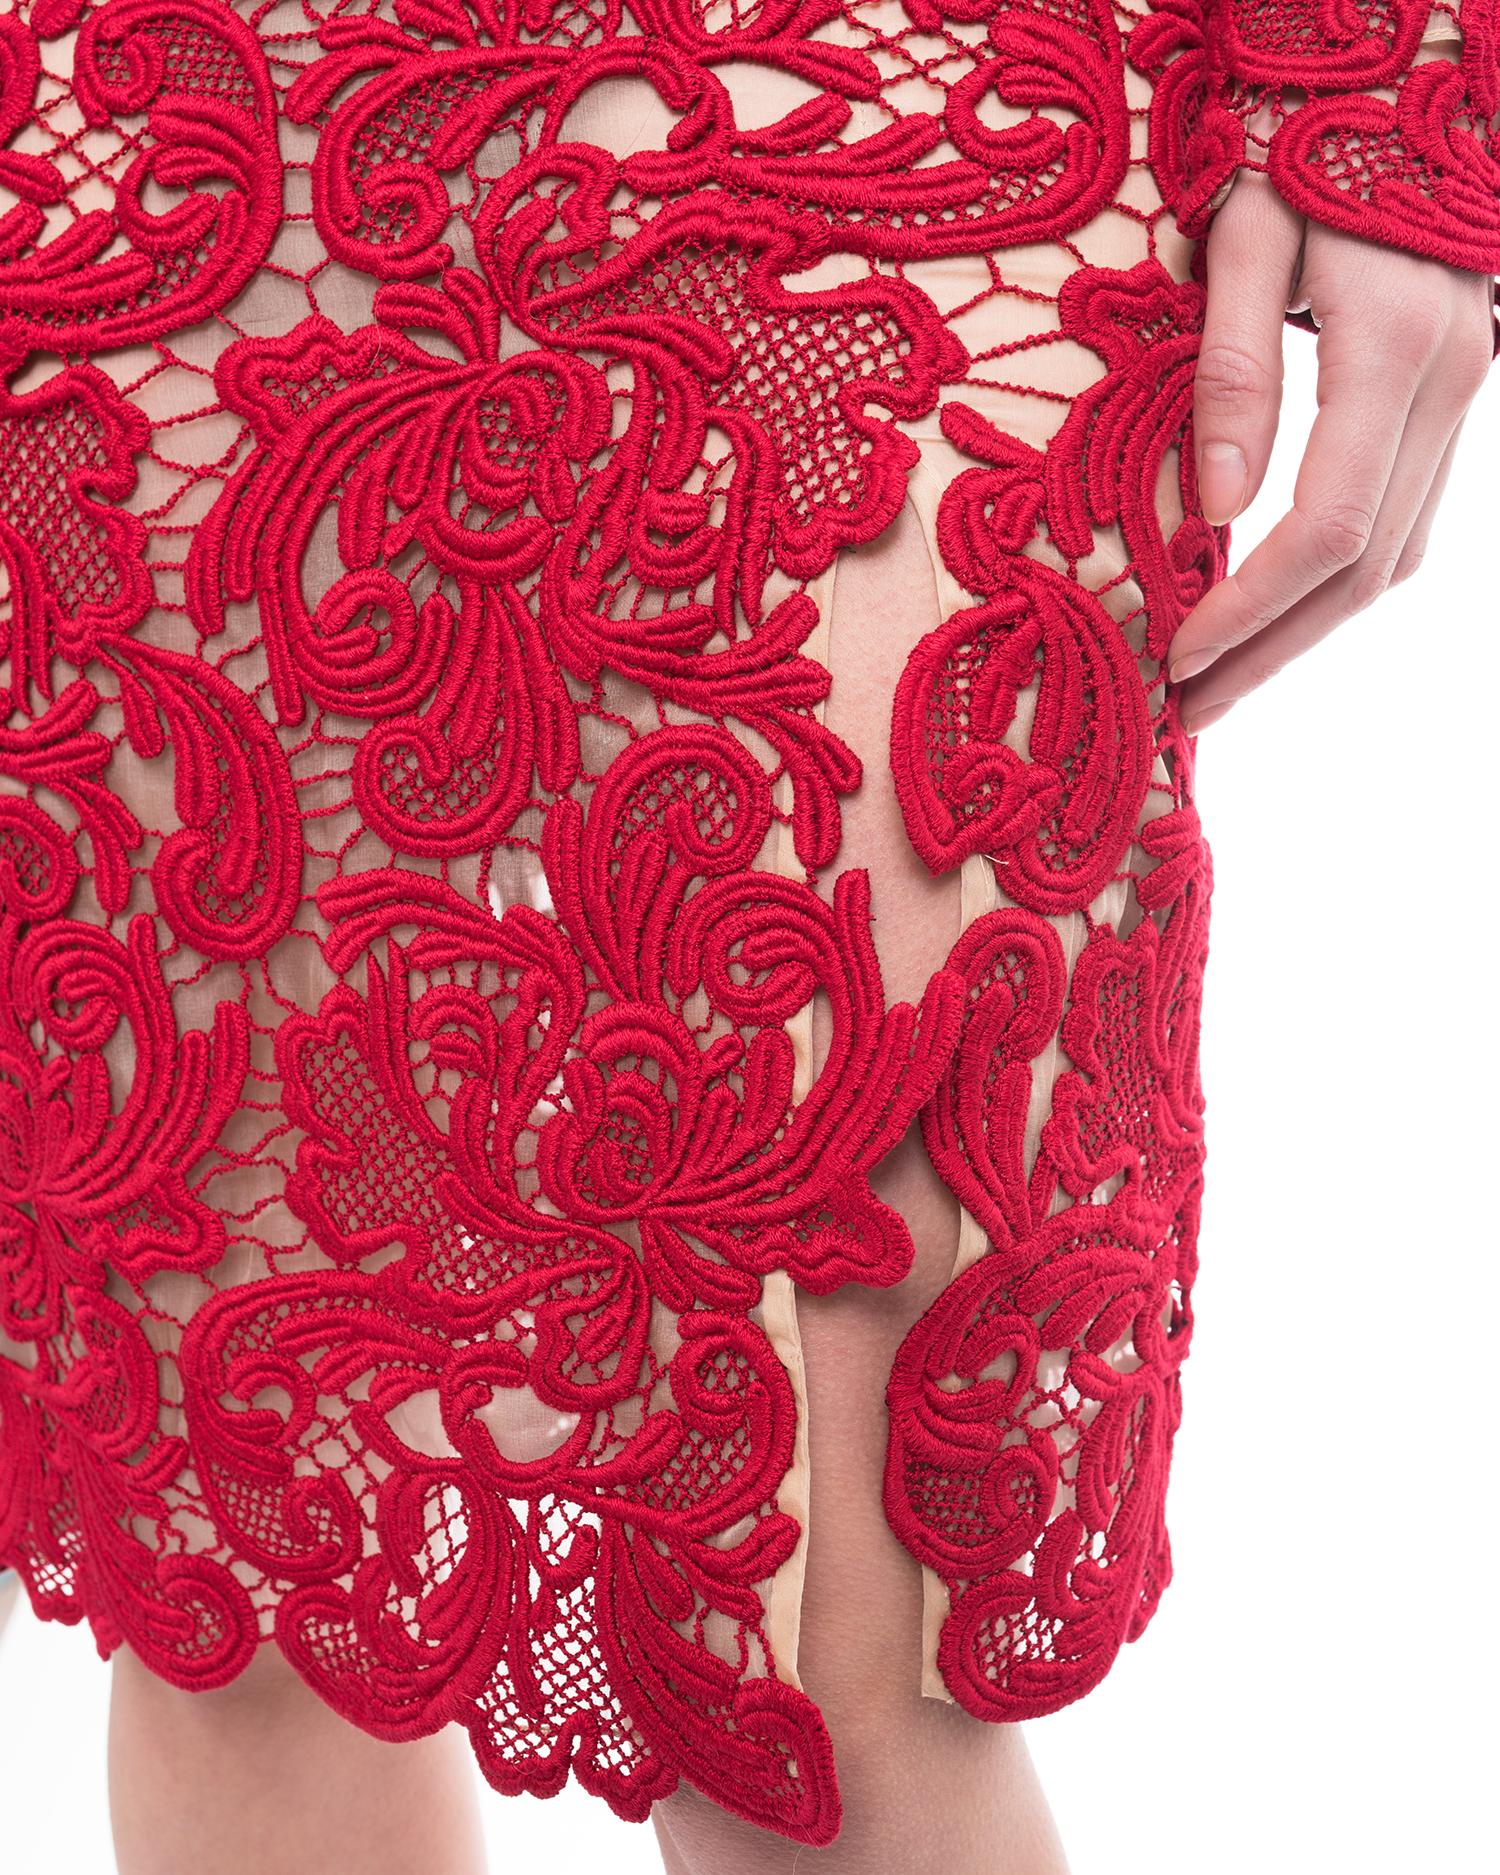 Erdem Fall 2015 Red Guipure Lace Long Sleeve Cocktail Dress - 2/4 6